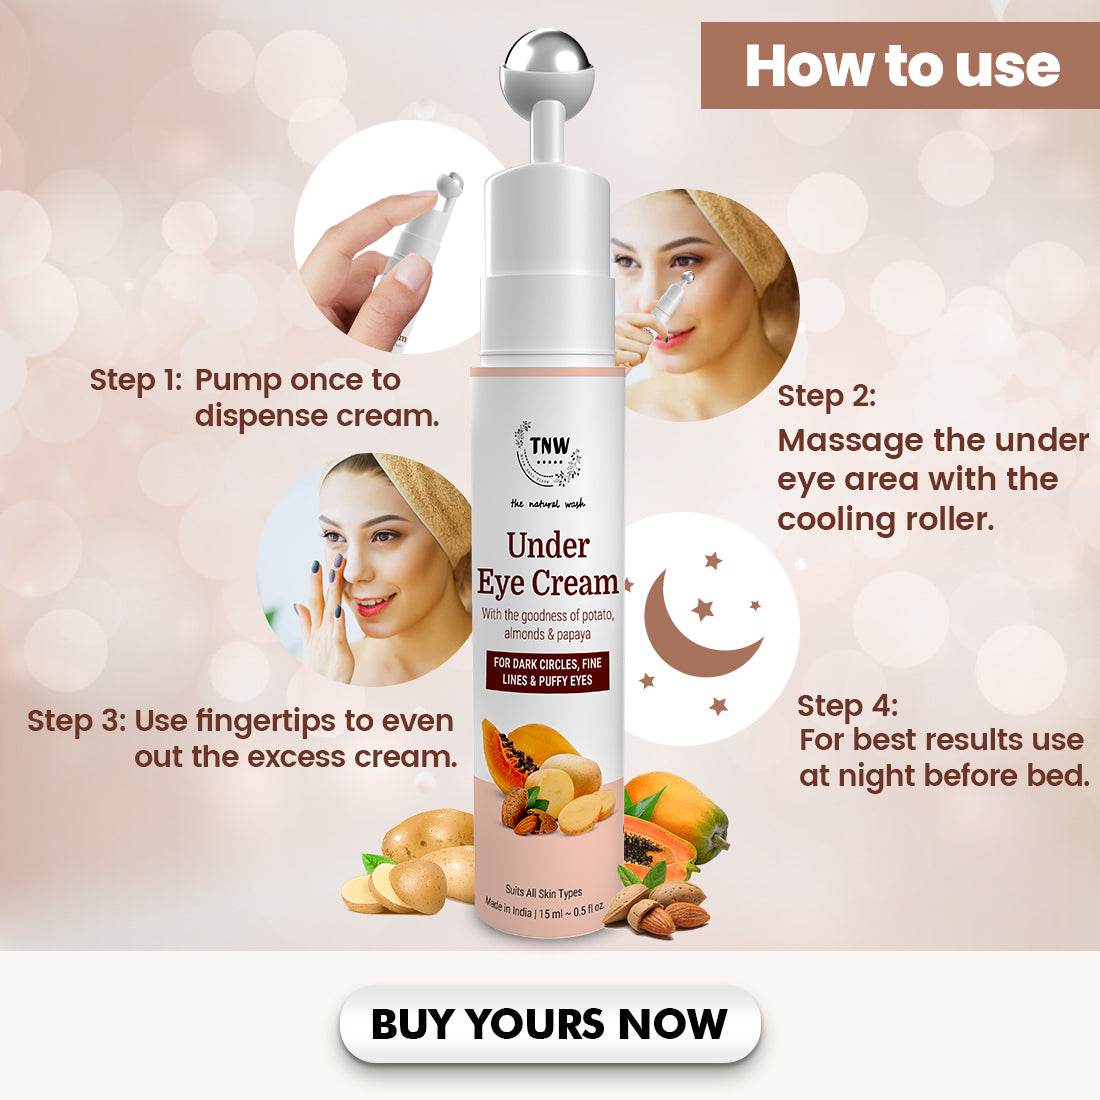 How to use Under Eye Cream